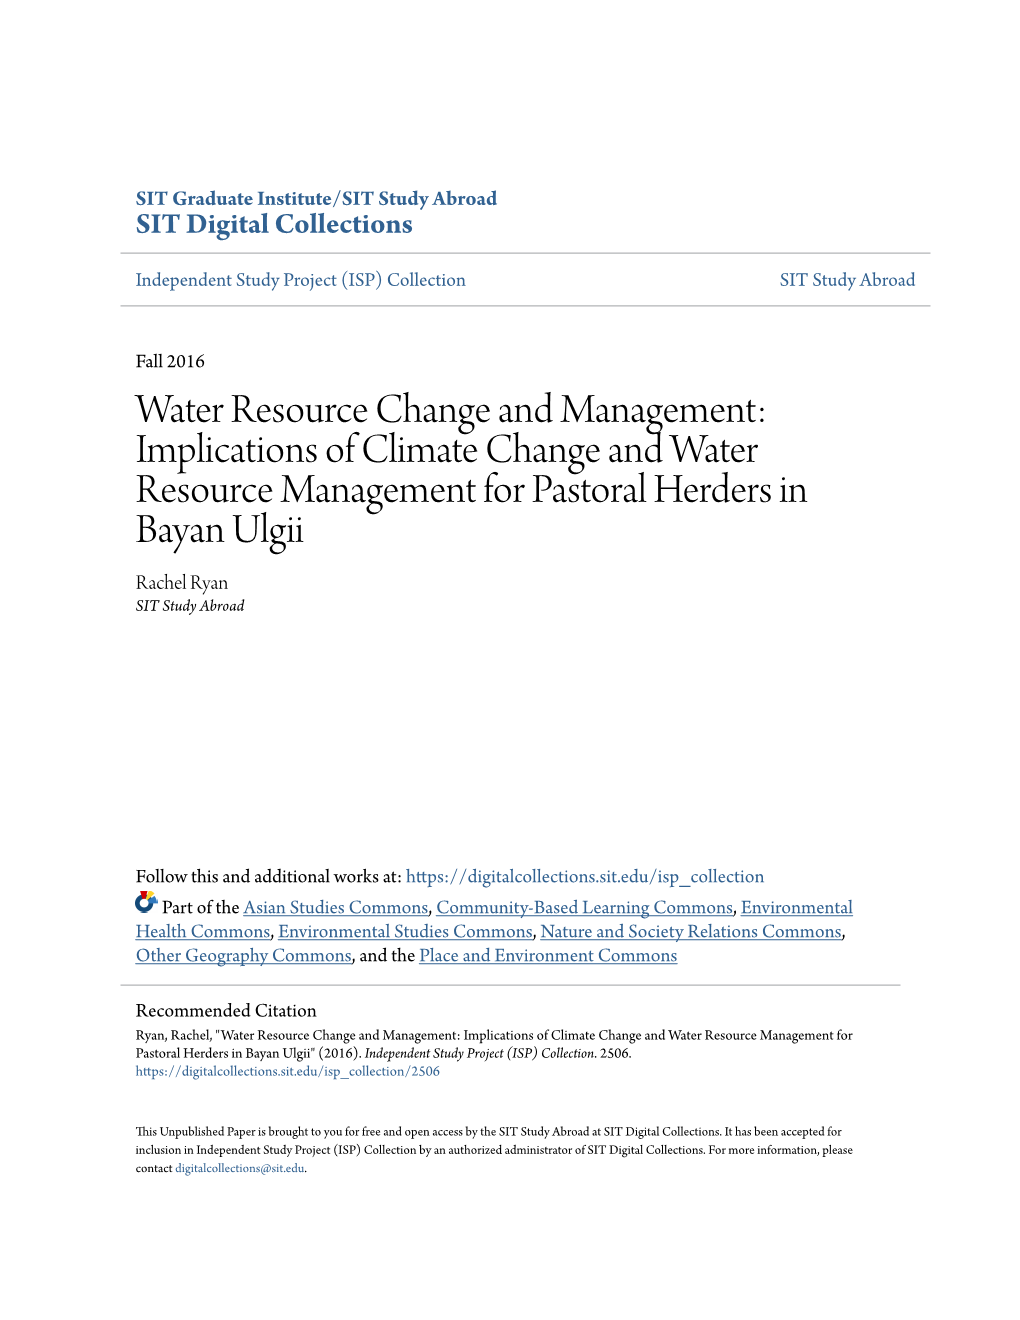 Implications of Climate Change and Water Resource Management for Pastoral Herders in Bayan Ulgii Rachel Ryan SIT Study Abroad